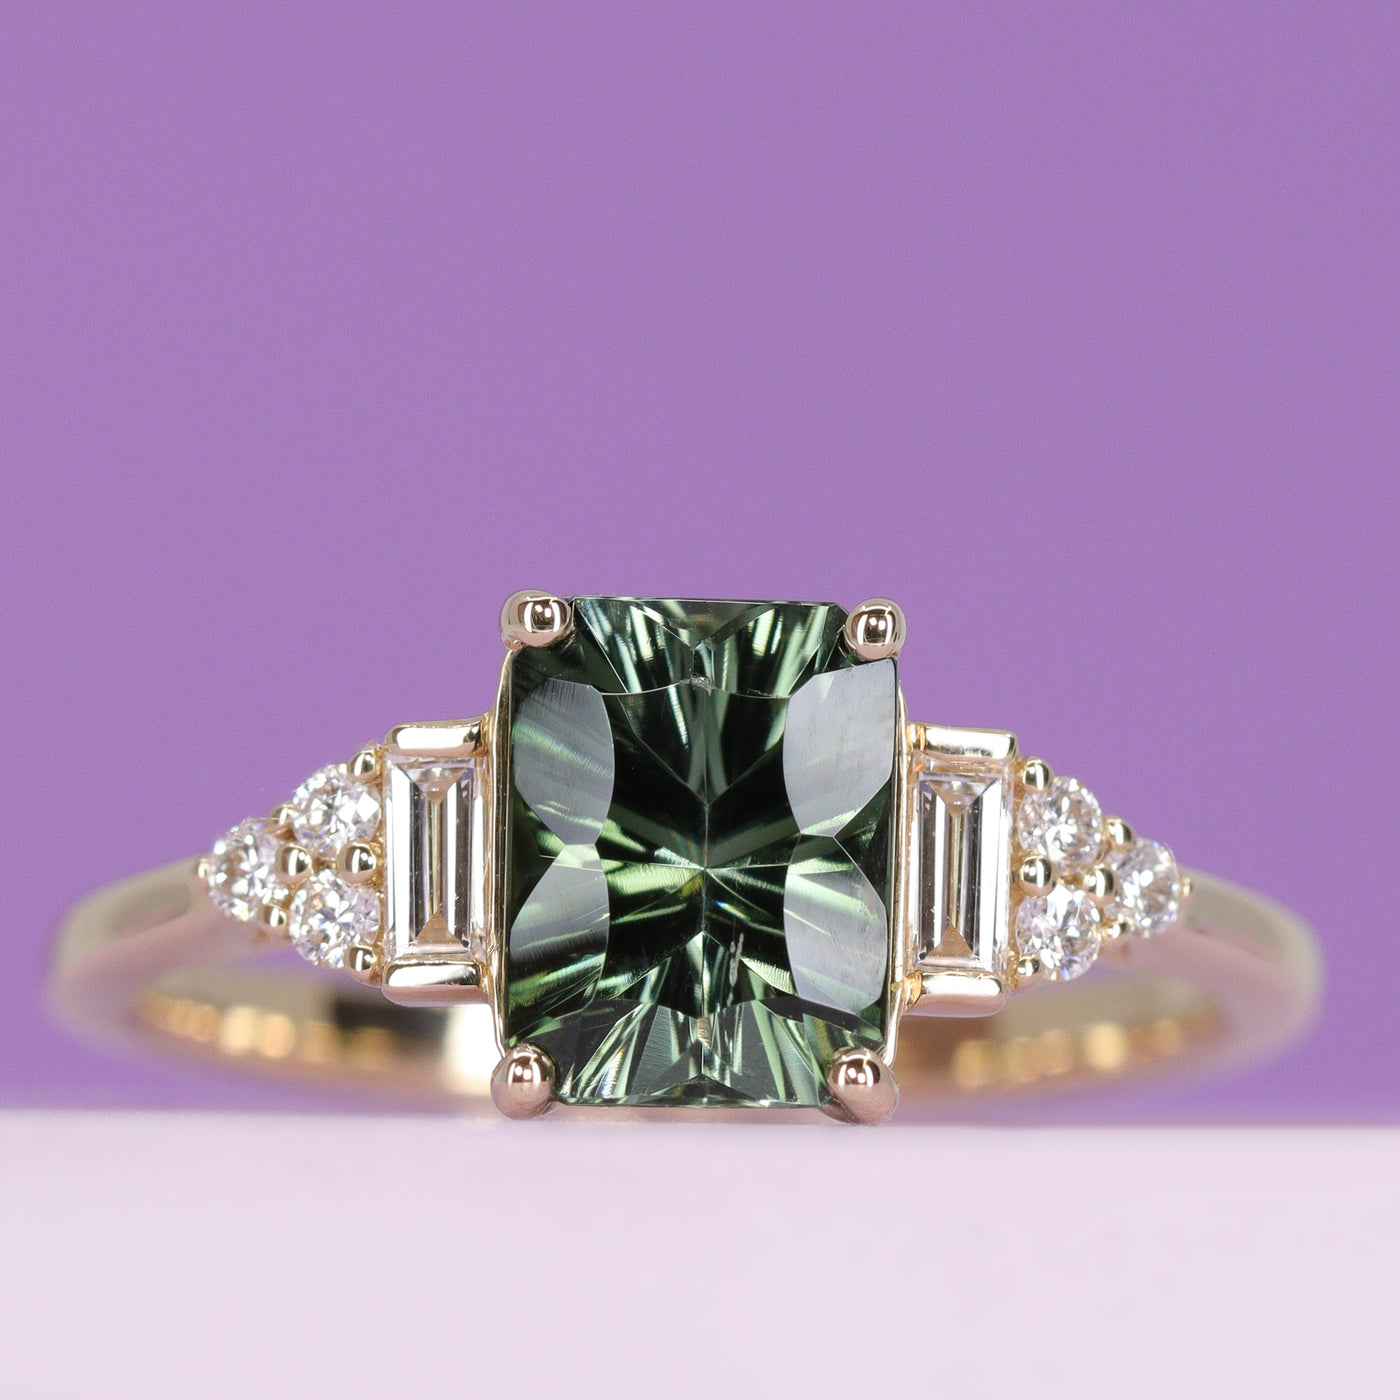 Arden - Optix Octagon Cut Green Teal Tourmaline Art Deco Engagement Ring with Lab Grown Diamond Side Stones - Custom Made-to-Order Design